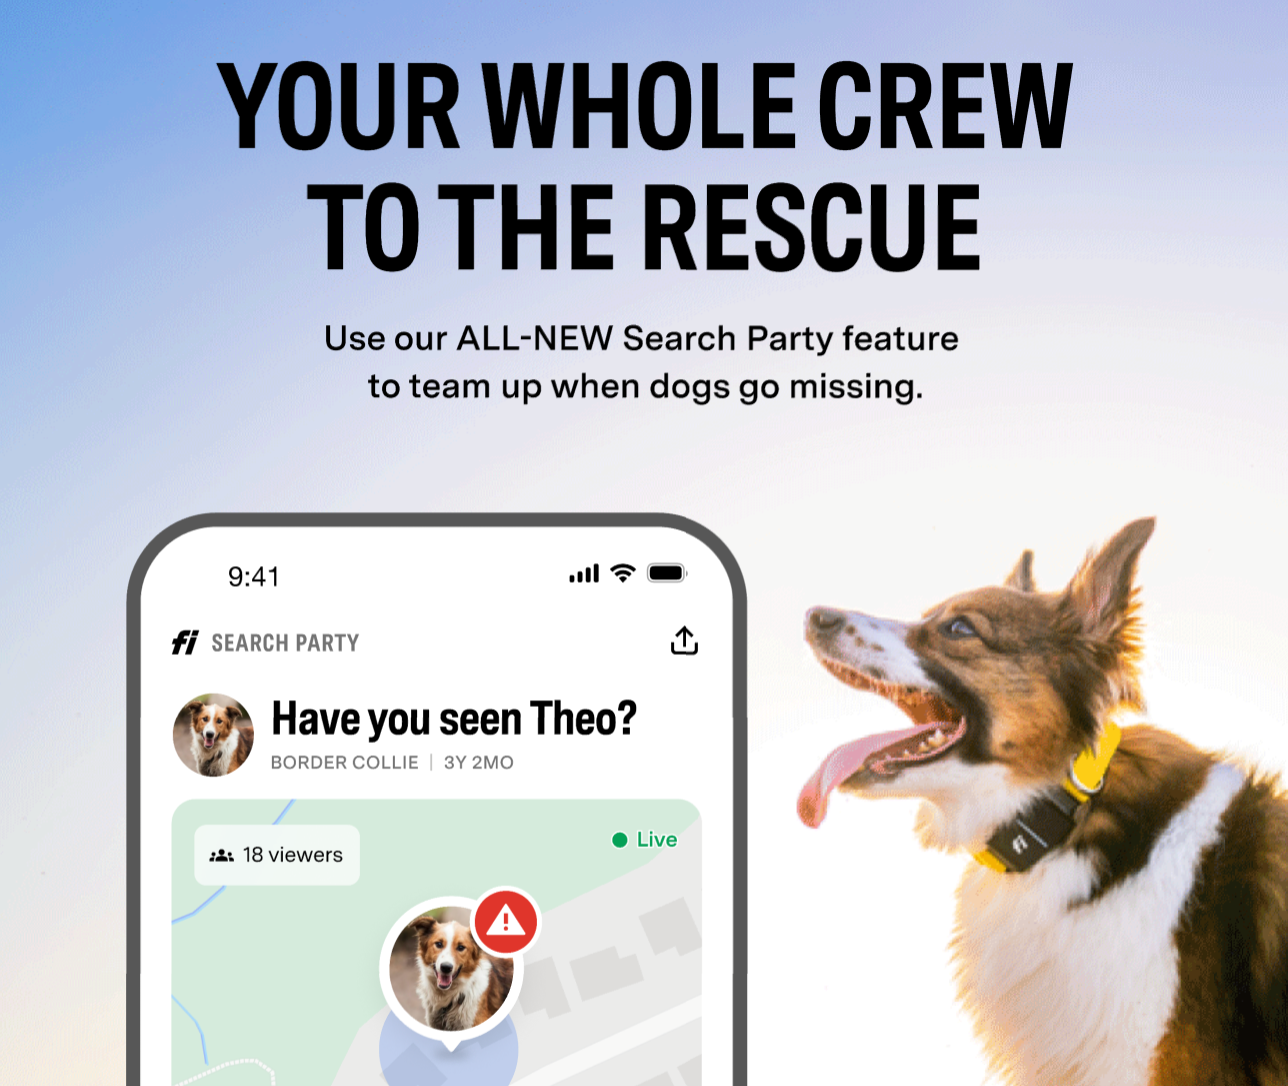 NEW FEATURE: Search Party